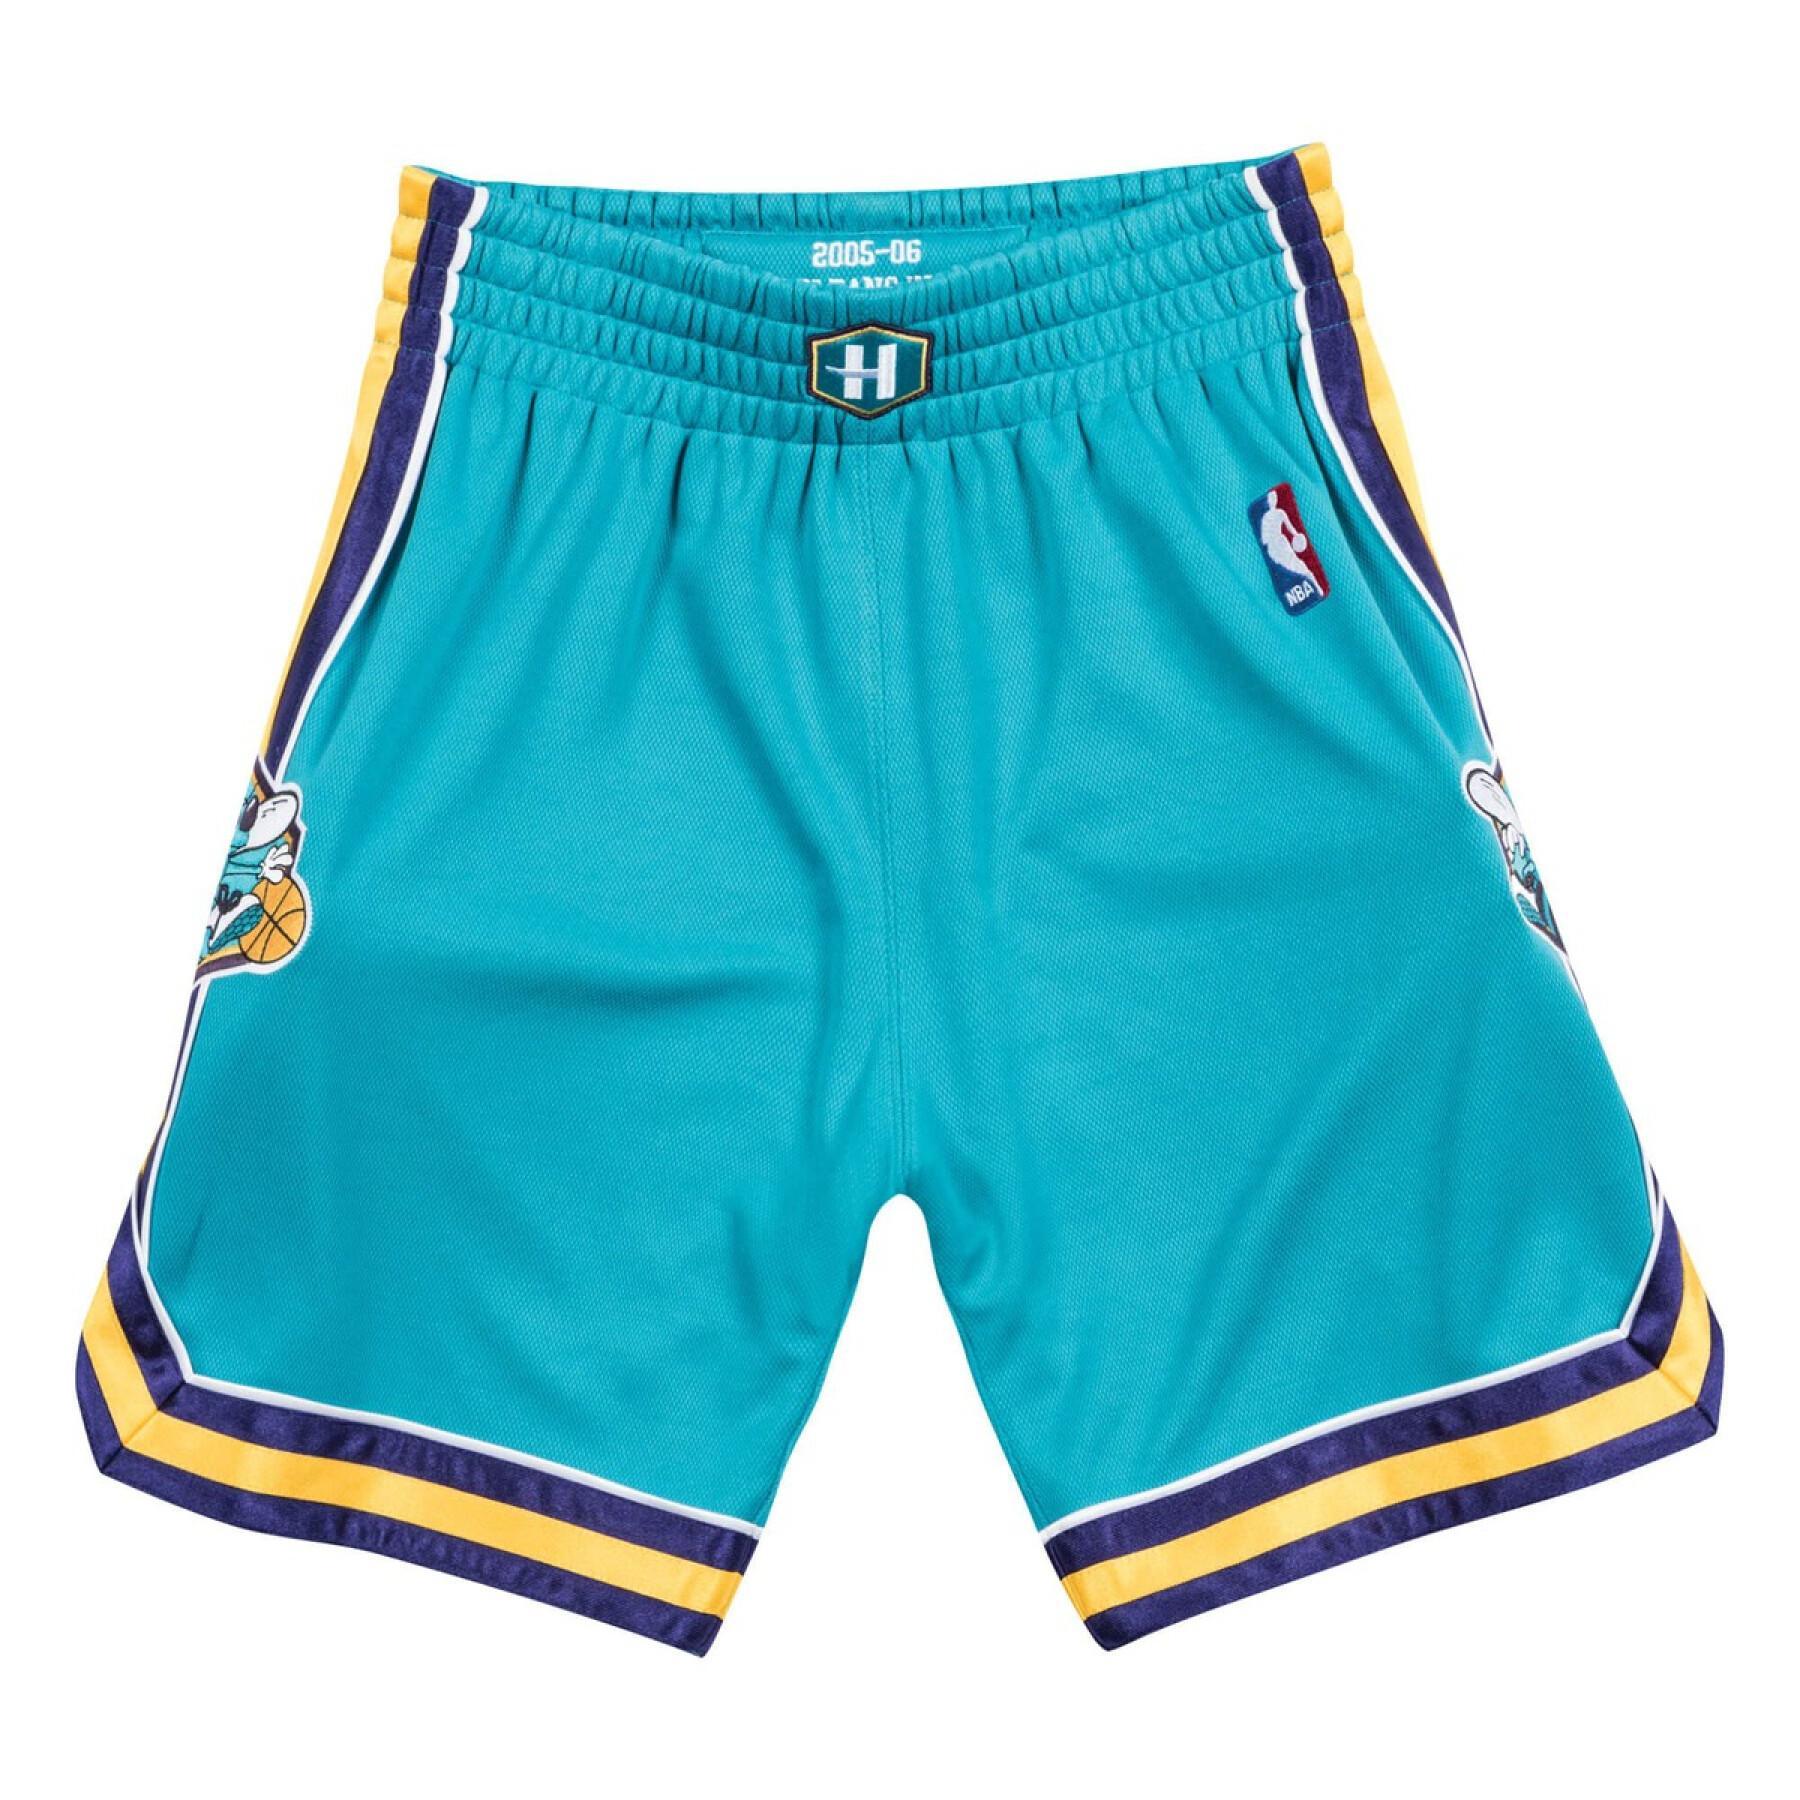 Authentic shorts New Orleans Hornets nba